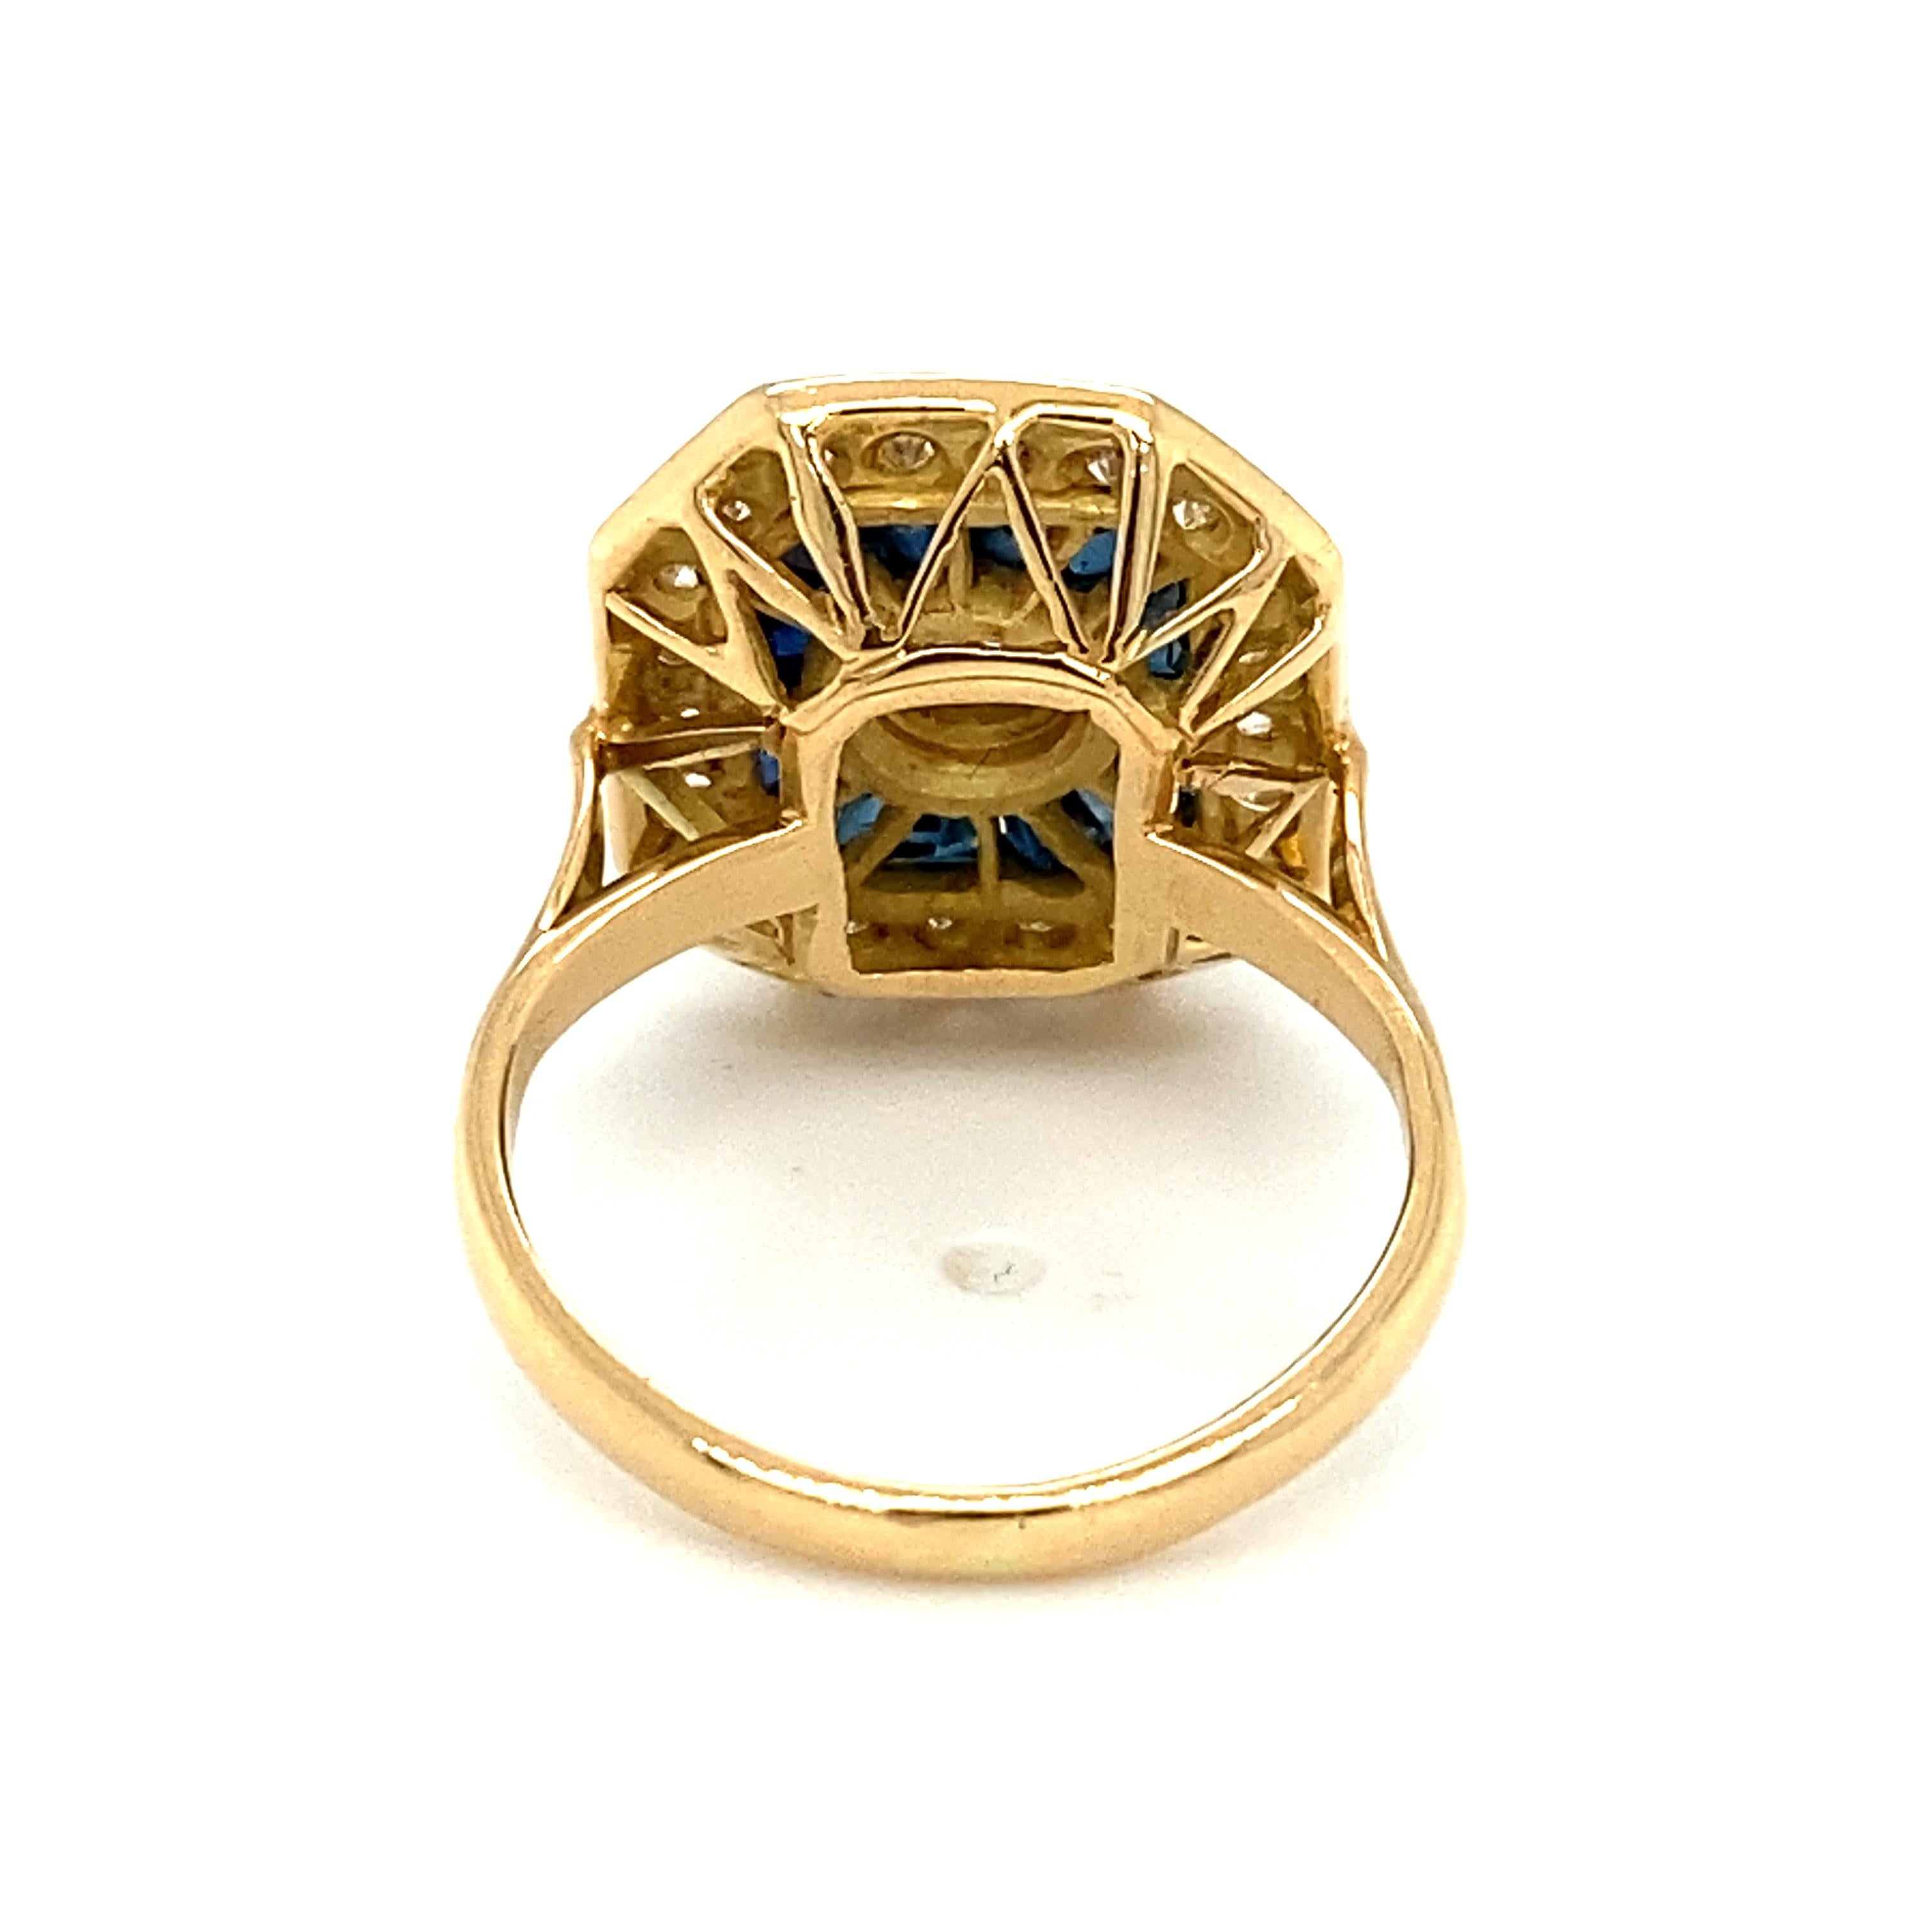 Item Details: This unique ring has a center round diamond in a bezel setting surrounded by sapphires and accent diamonds. It makes for an excellent cocktail or statement ring!

Circa: 2000s
Metal Type: 18 Karat gold
Weight: 5.5 grams
Size: US 4.25,